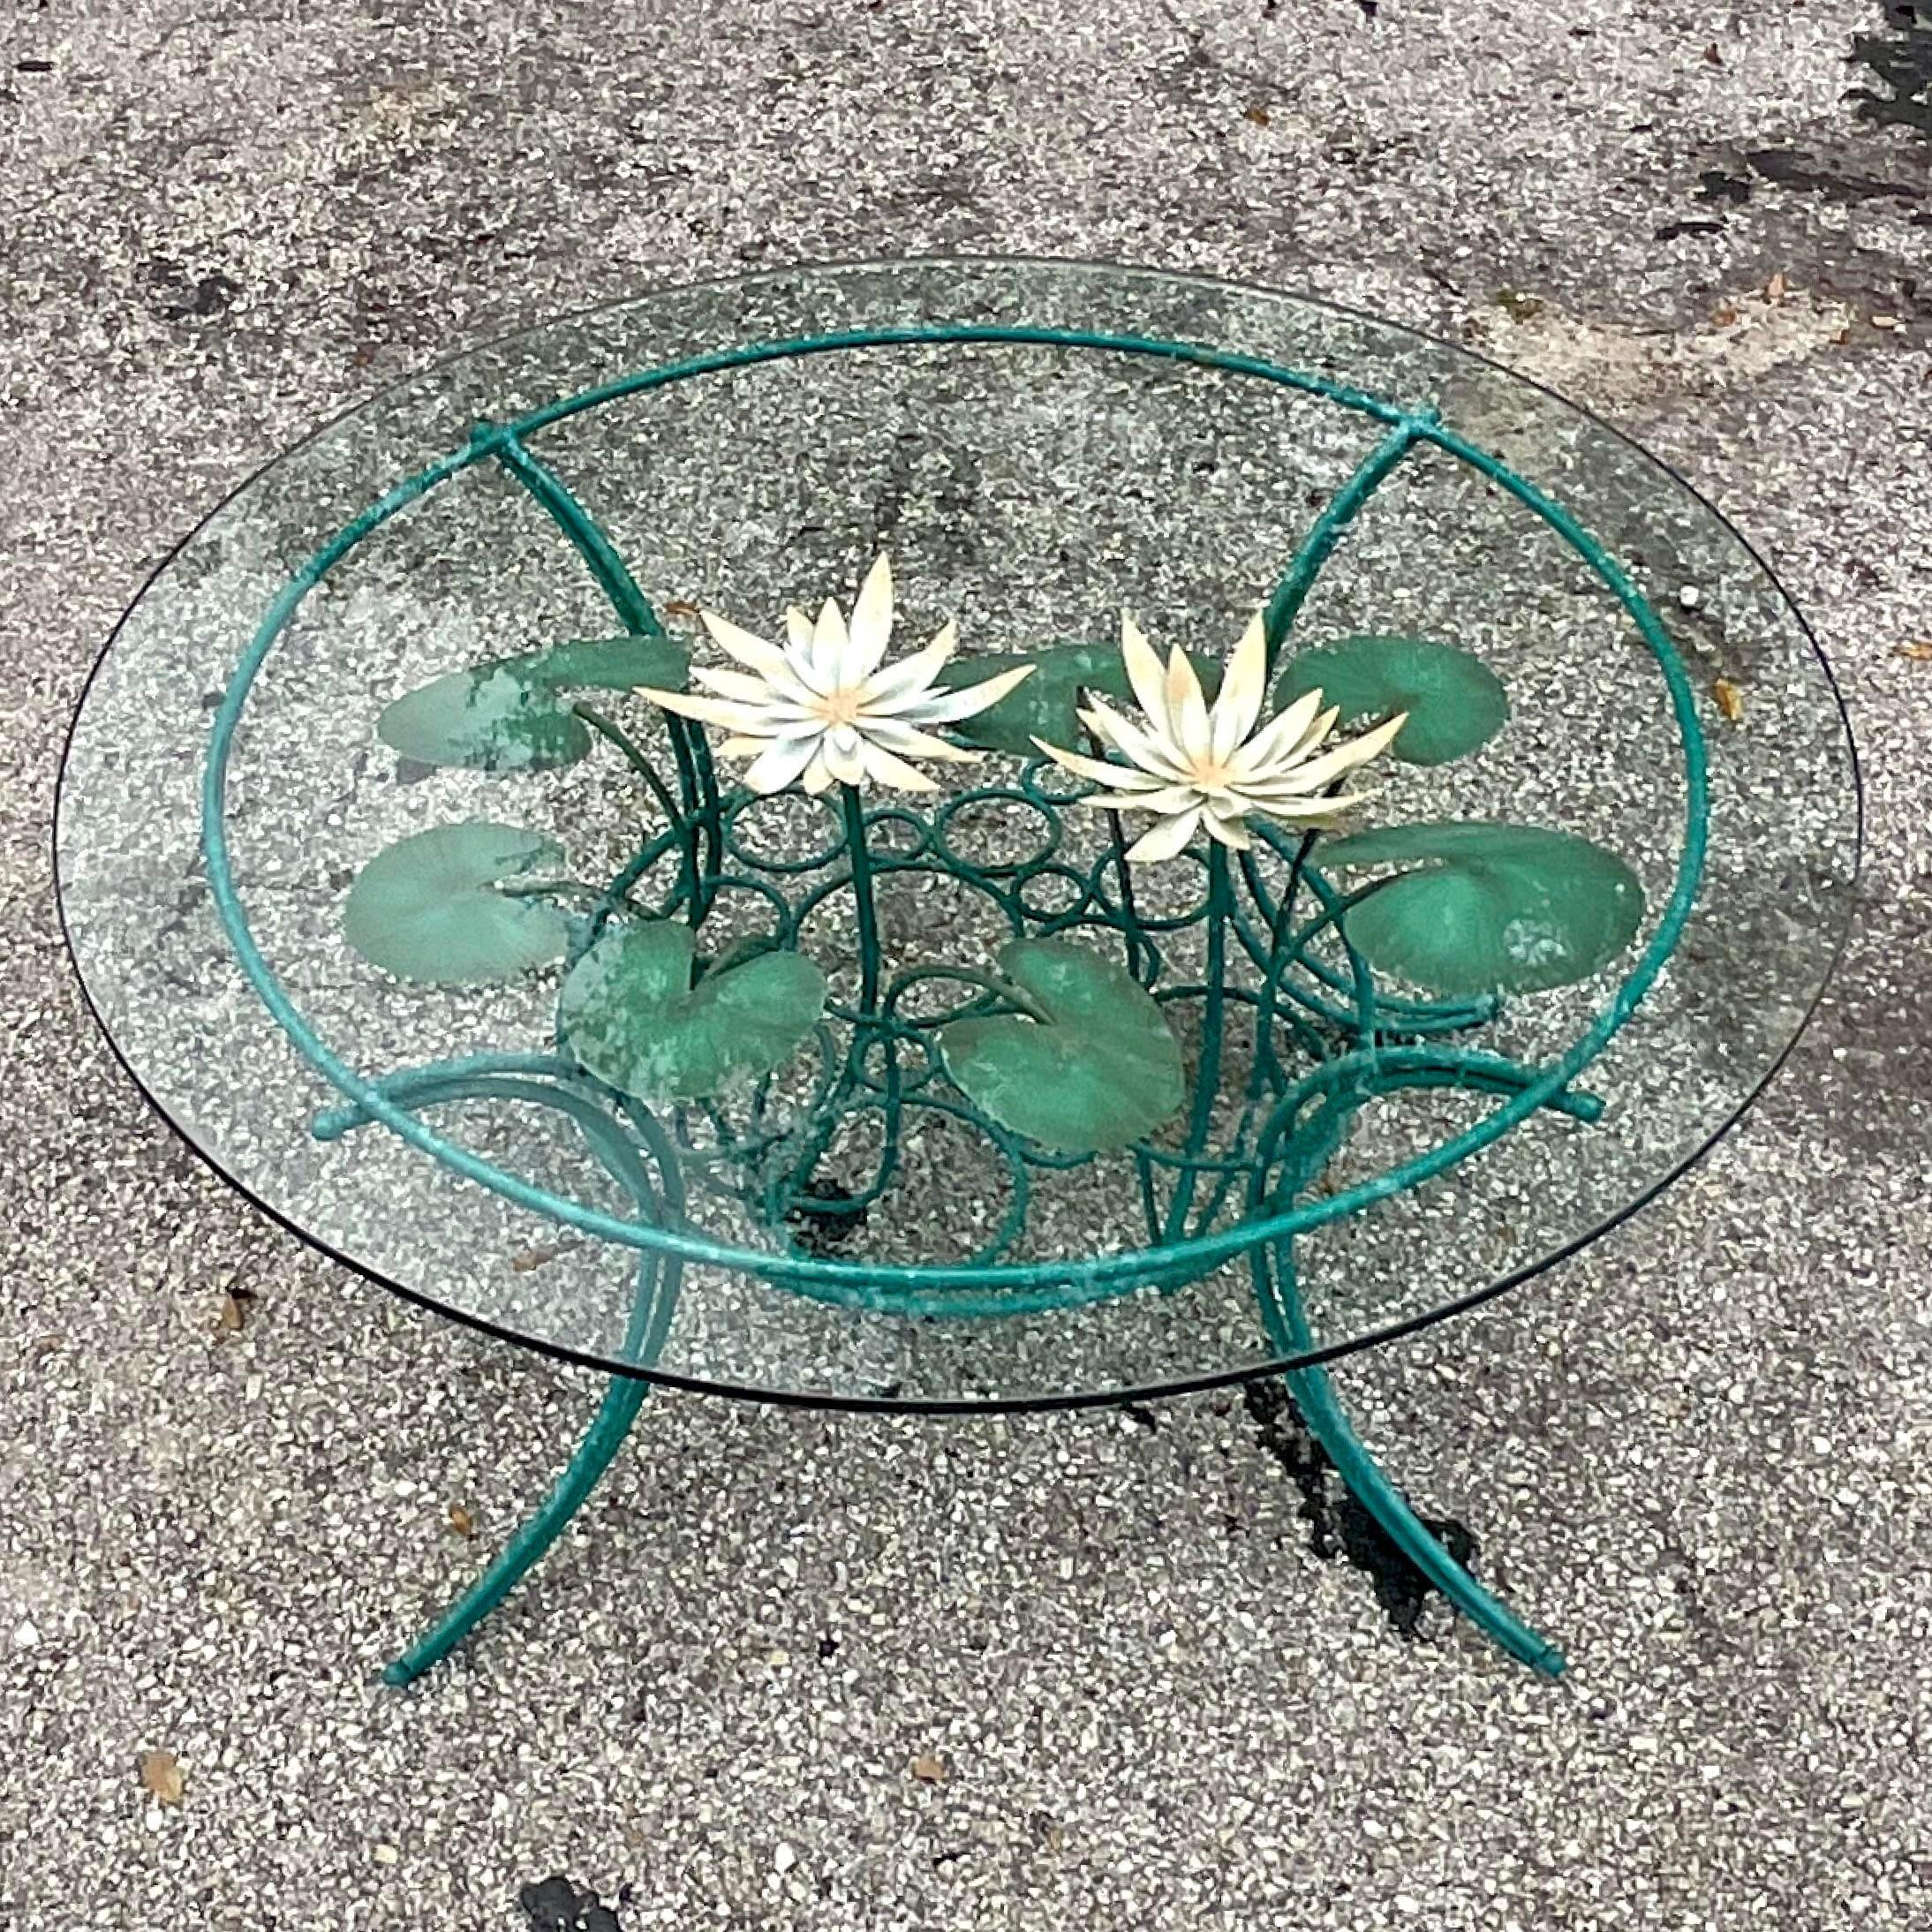 A fabulous vintage Boho Painted metal coffee table. Done by the iconic Curtis Jere and signed on the frame. Beautiful lily pad design with a chic floral motif. Acquired from a Palm Beach estate.